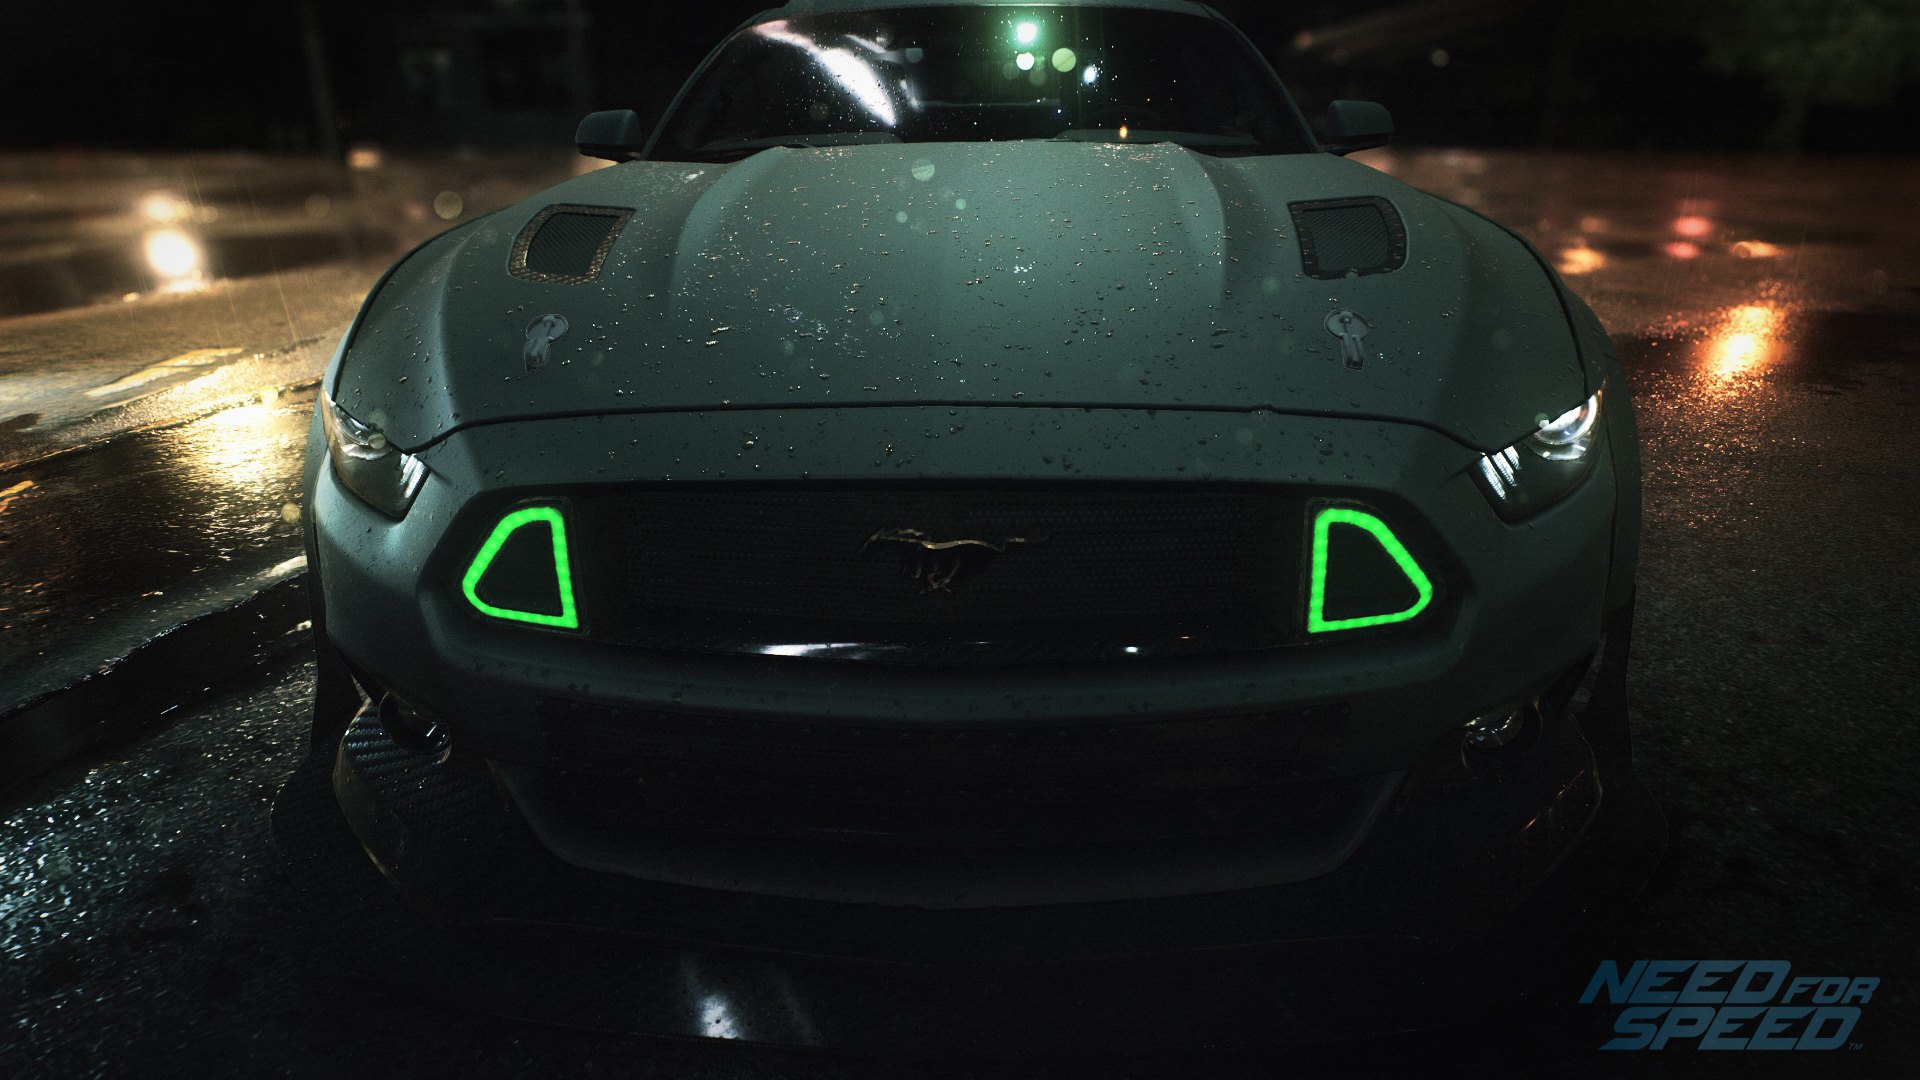 Need For Speed Wallpaper HD